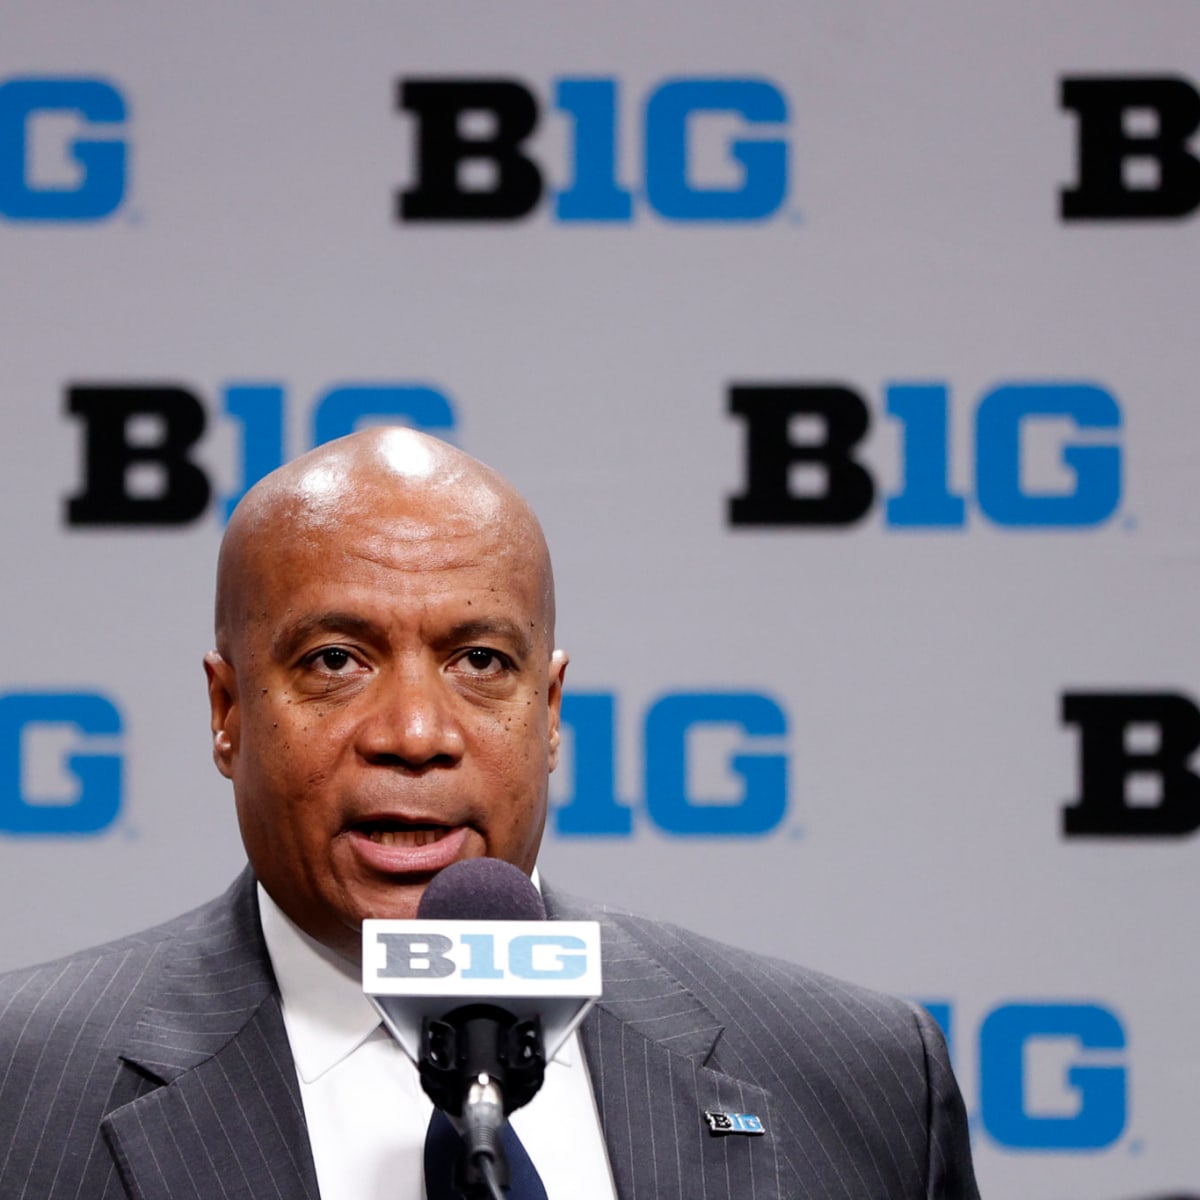 If the Big Ten expands to 24 teams, what six schools would you